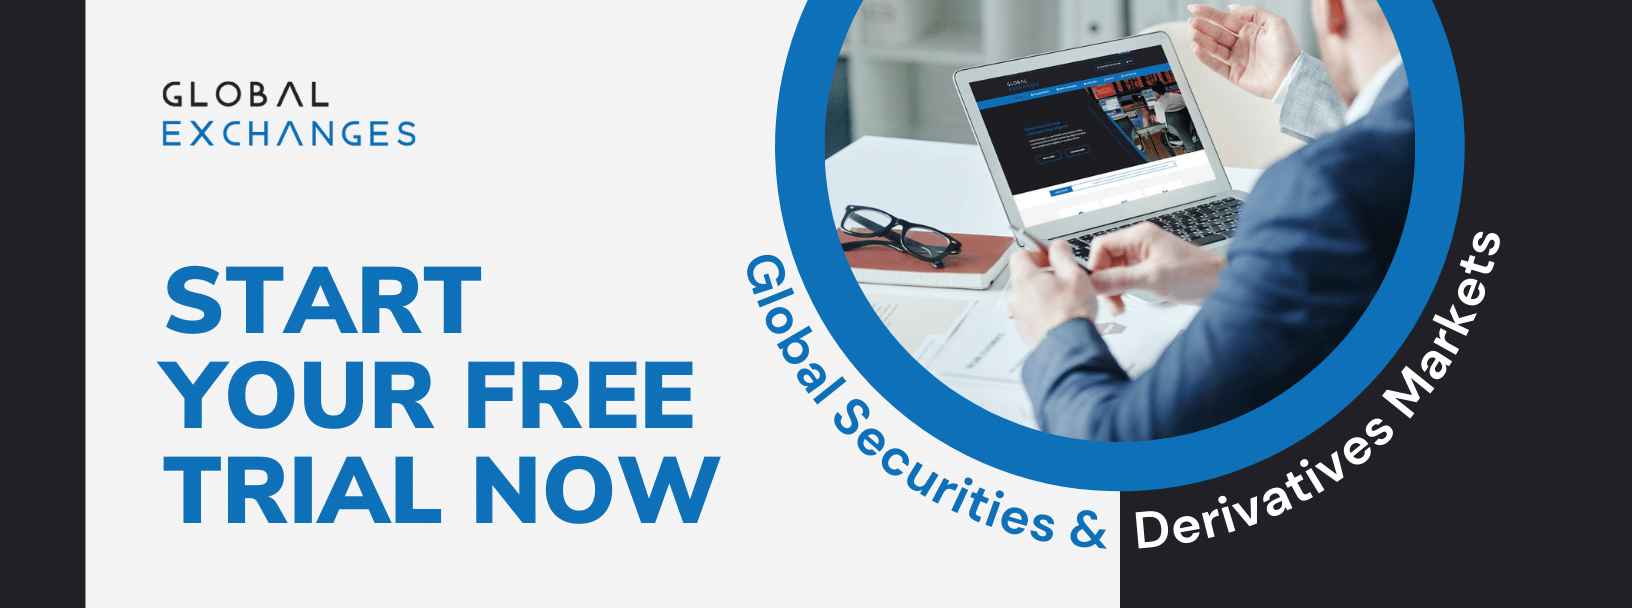 Try-Global-Exchanges-for-Free